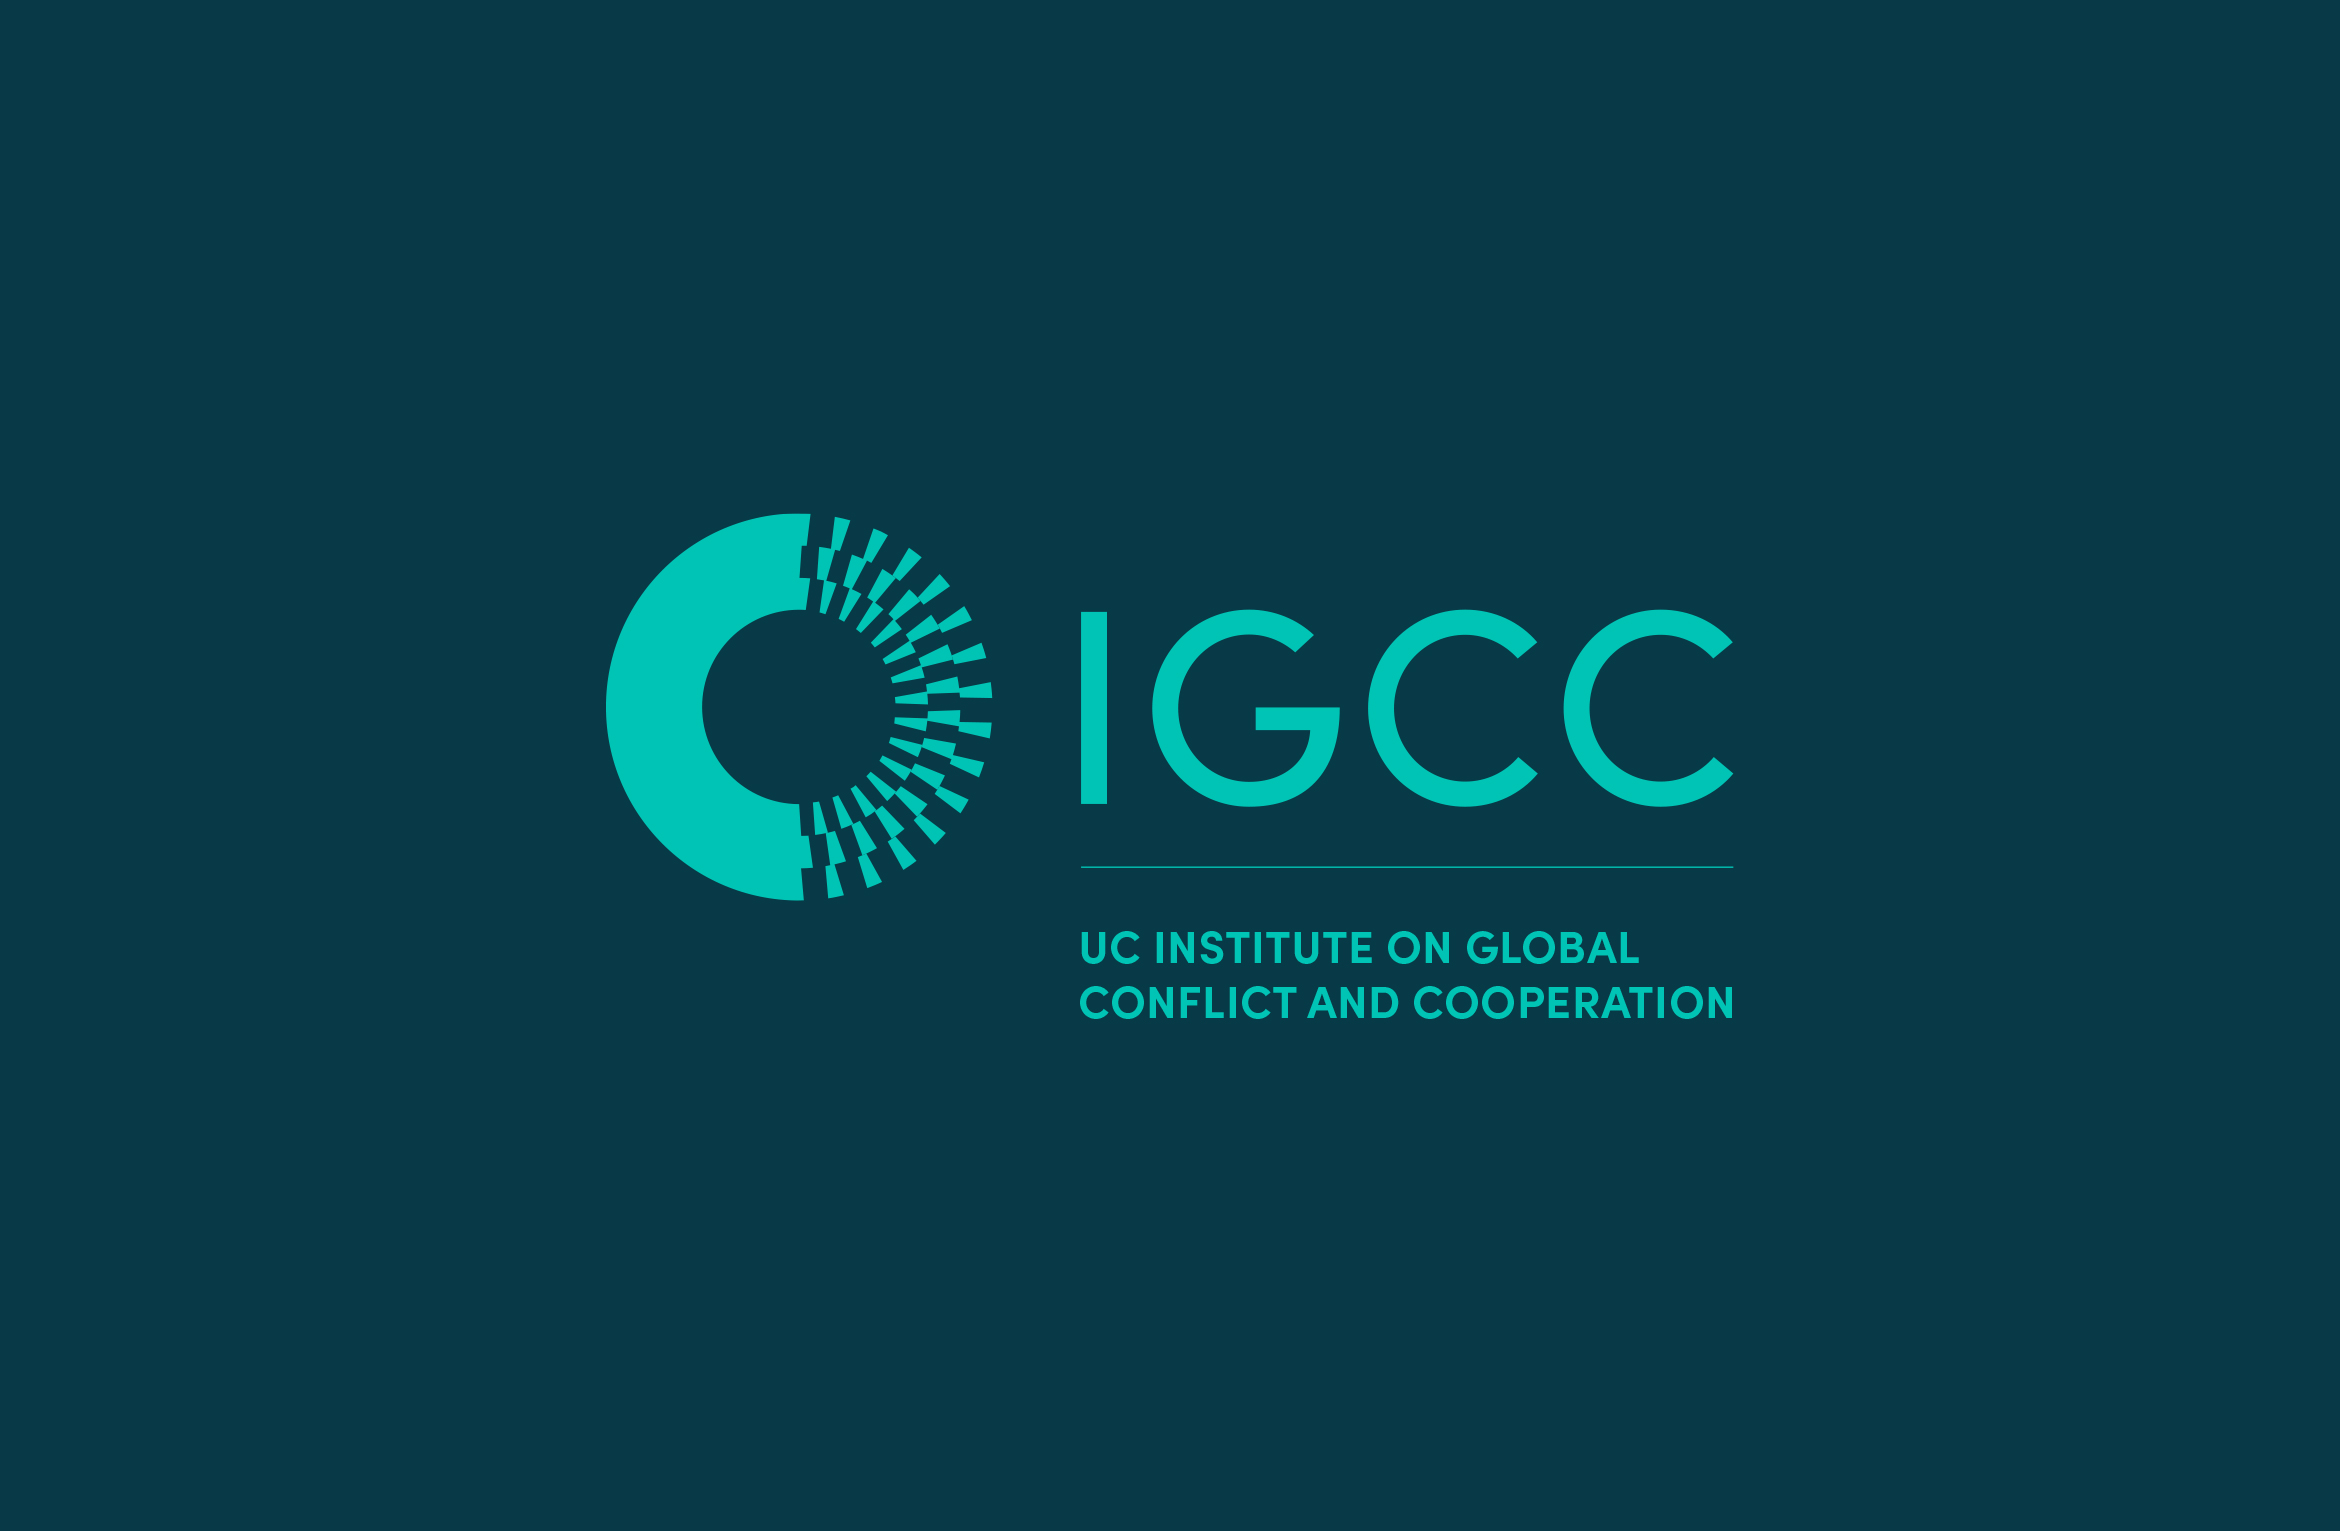 IGCC logo lockup with full name UC Institute on Global Conflict and Cooperation, turquoise on teal